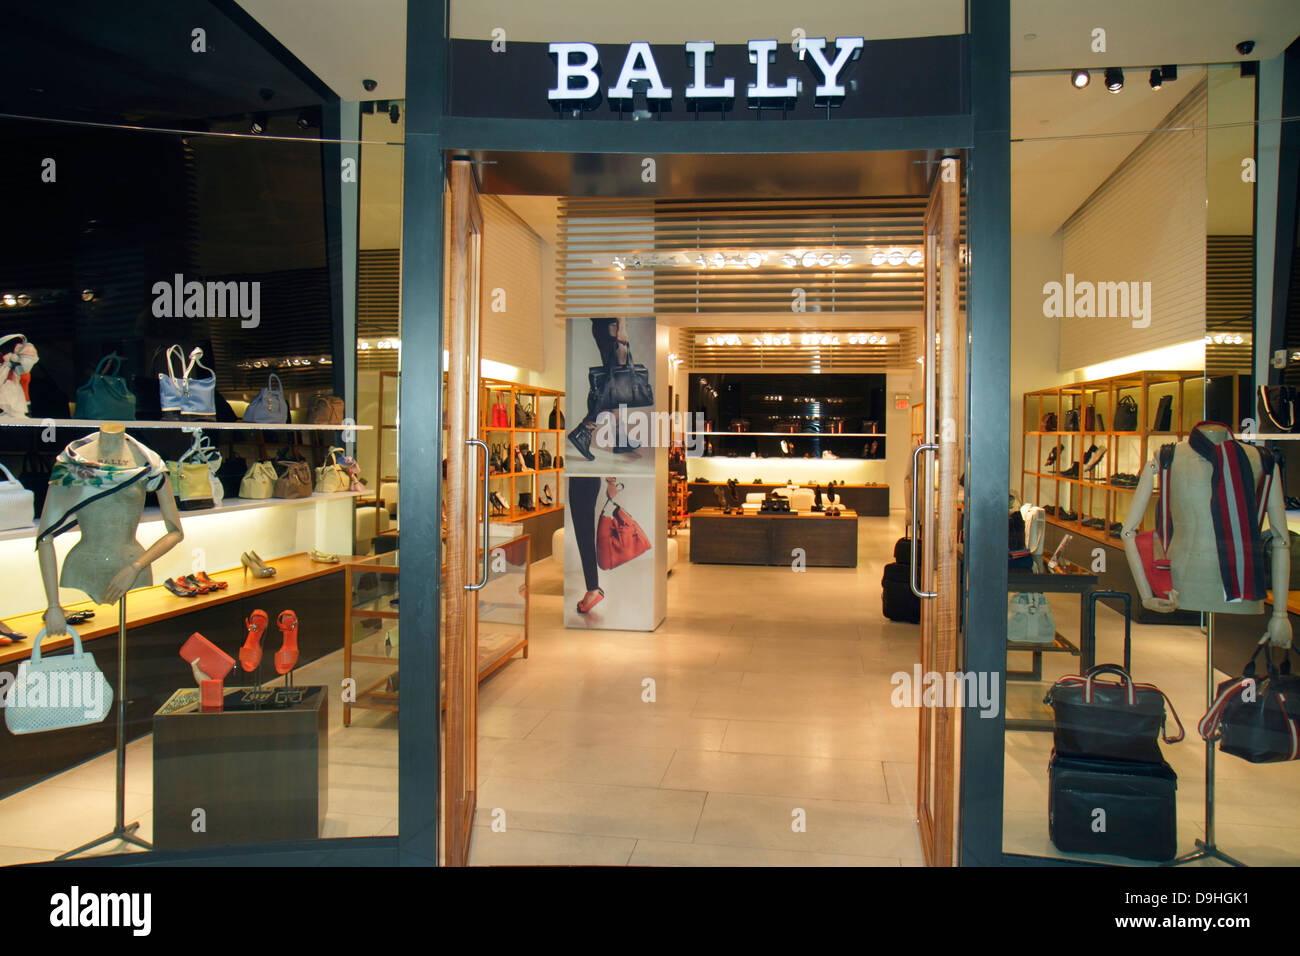 Bally High Resolution Stock Photography and Images - Alamy